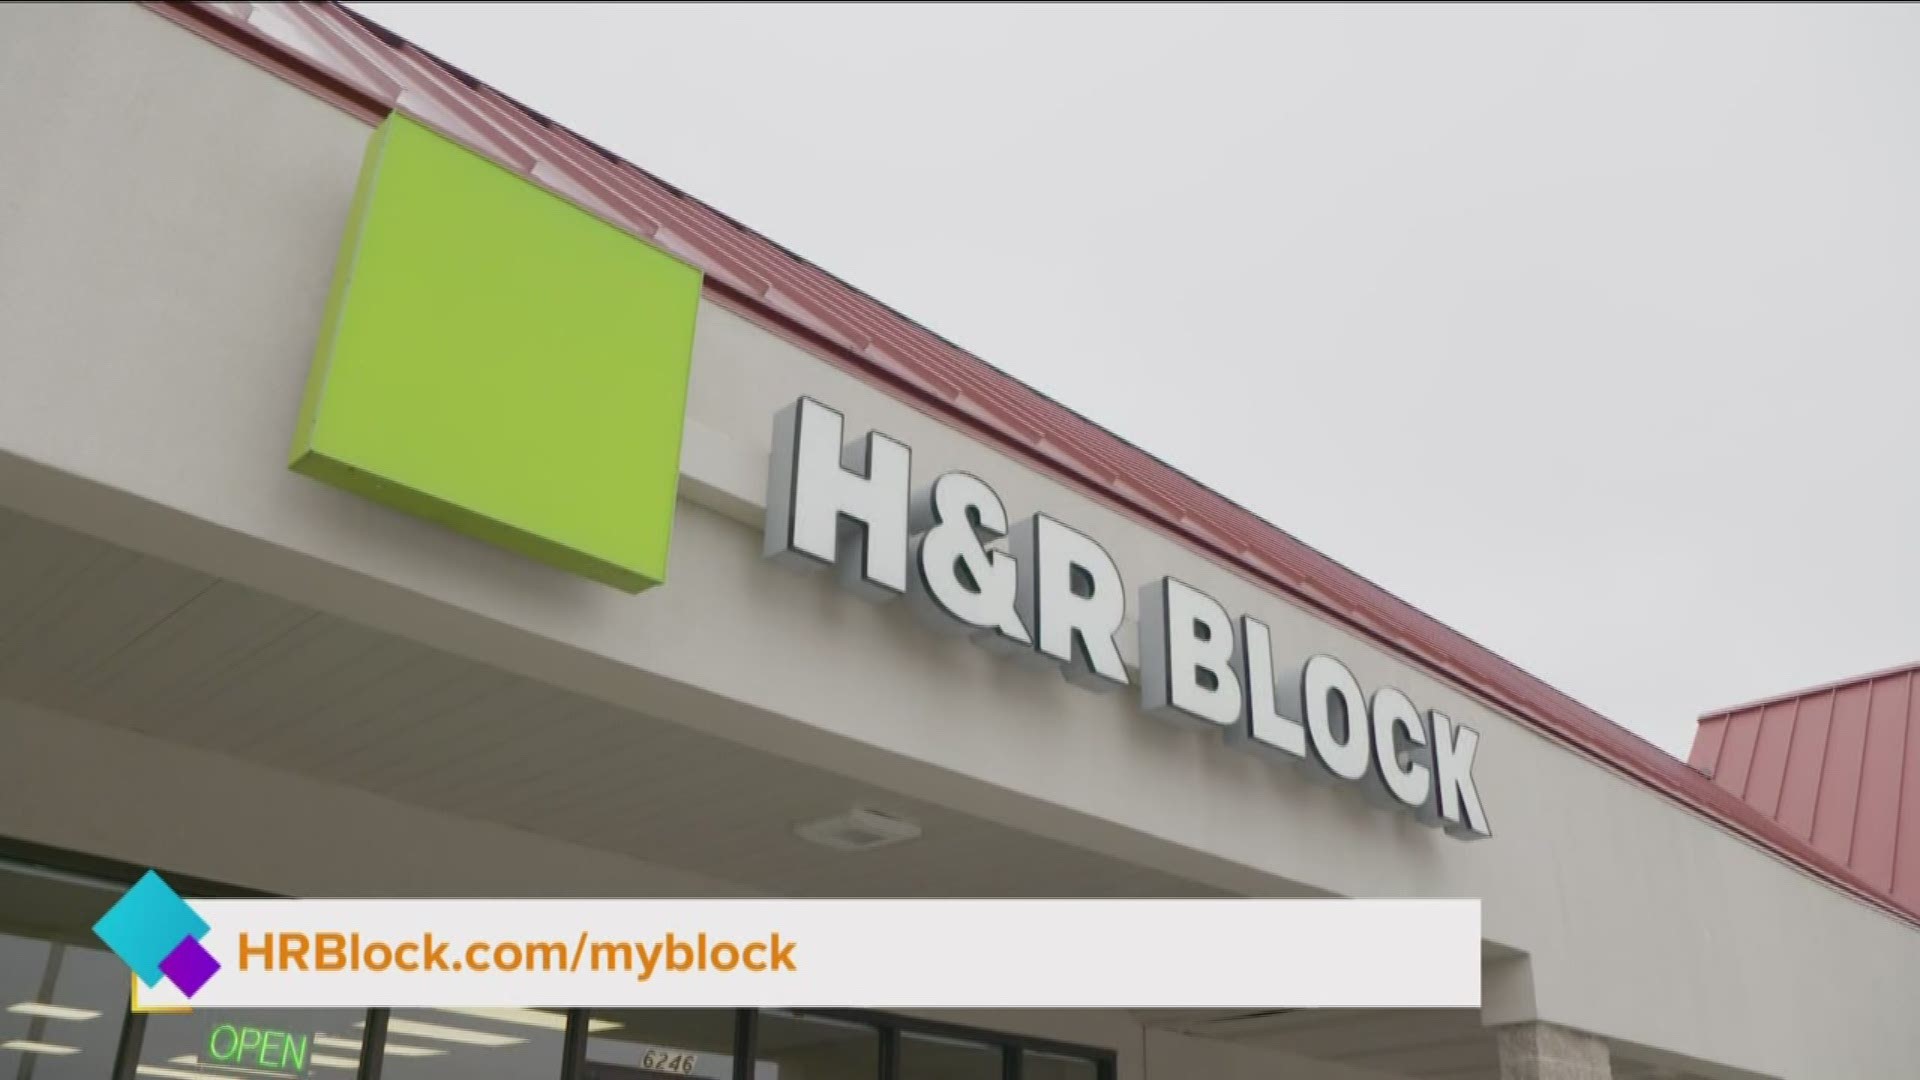 H&R Block shares how filing your taxes can be easy and beneficial.